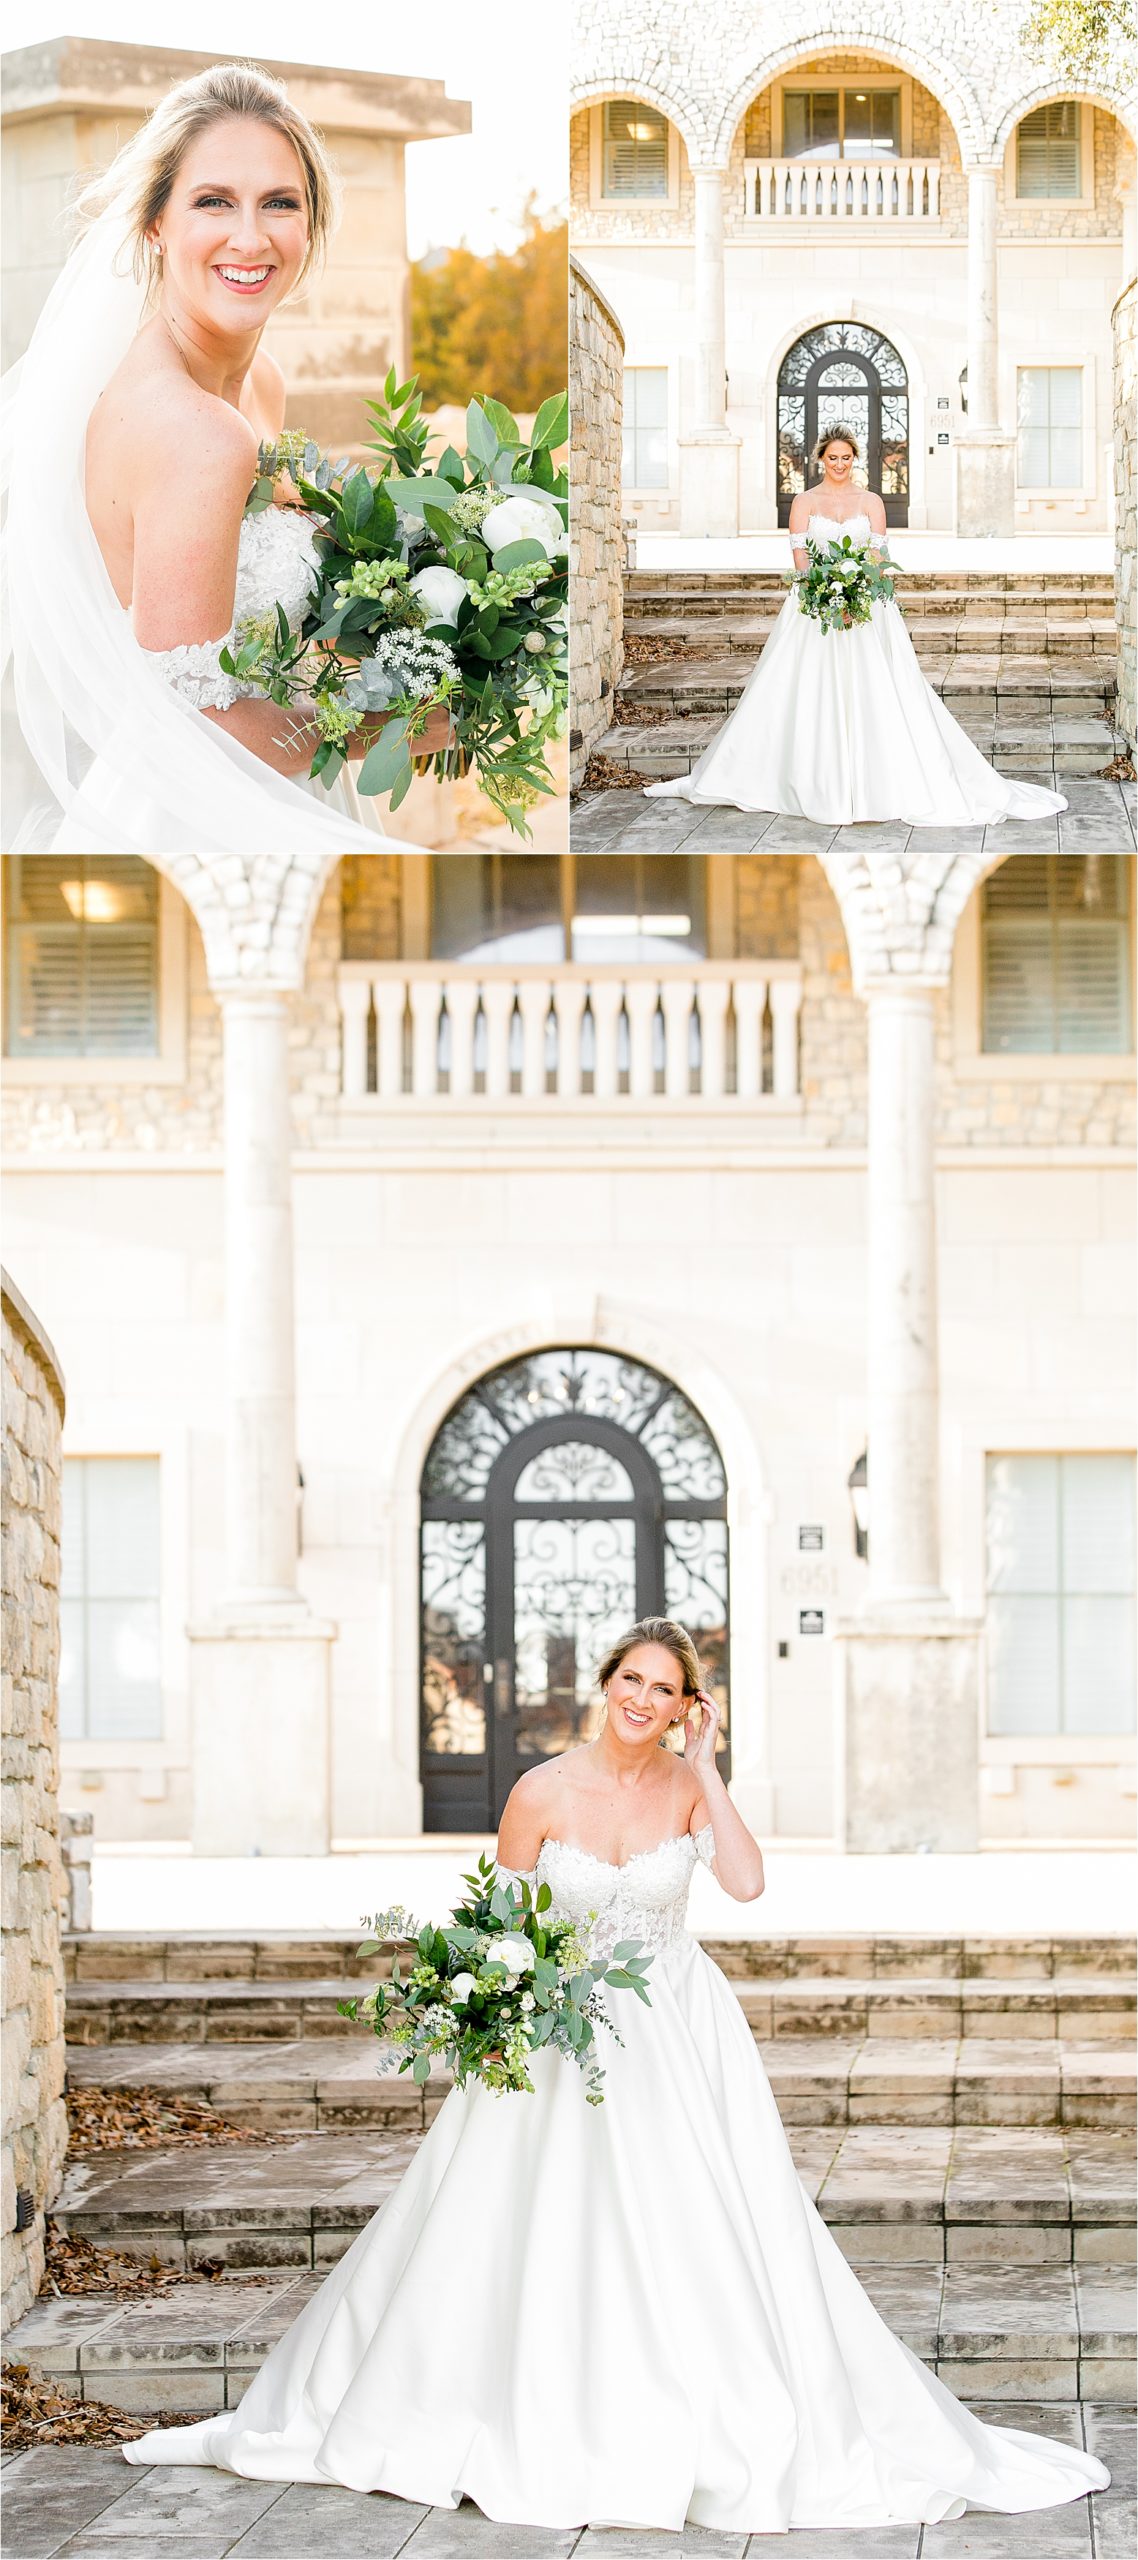 A full portrait of a bride looking straight into the camera in her off the shoulder wedding gown at adriatica village for her bridal portraits with san antonio wedding photographer jillian hogan 